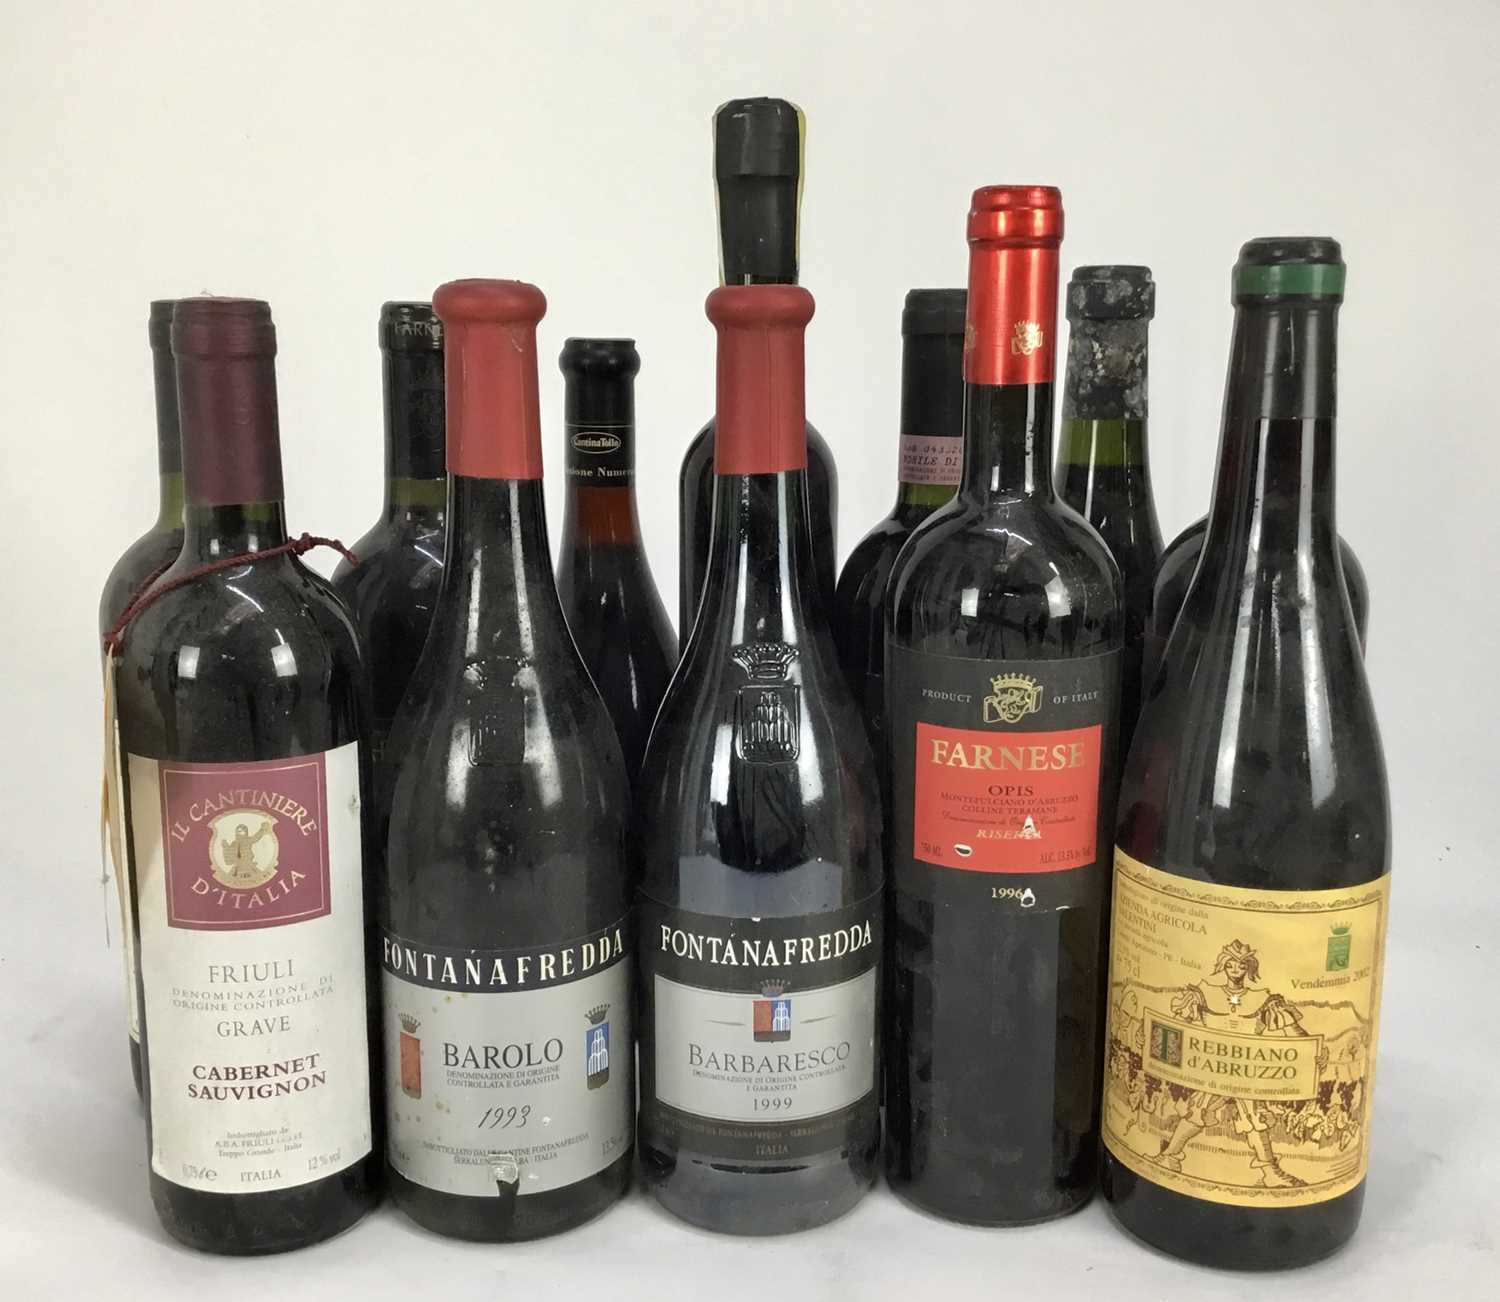 Lot 51 - Wine - twelve bottles, Italian reds to include Barolo, Barbaresco and others